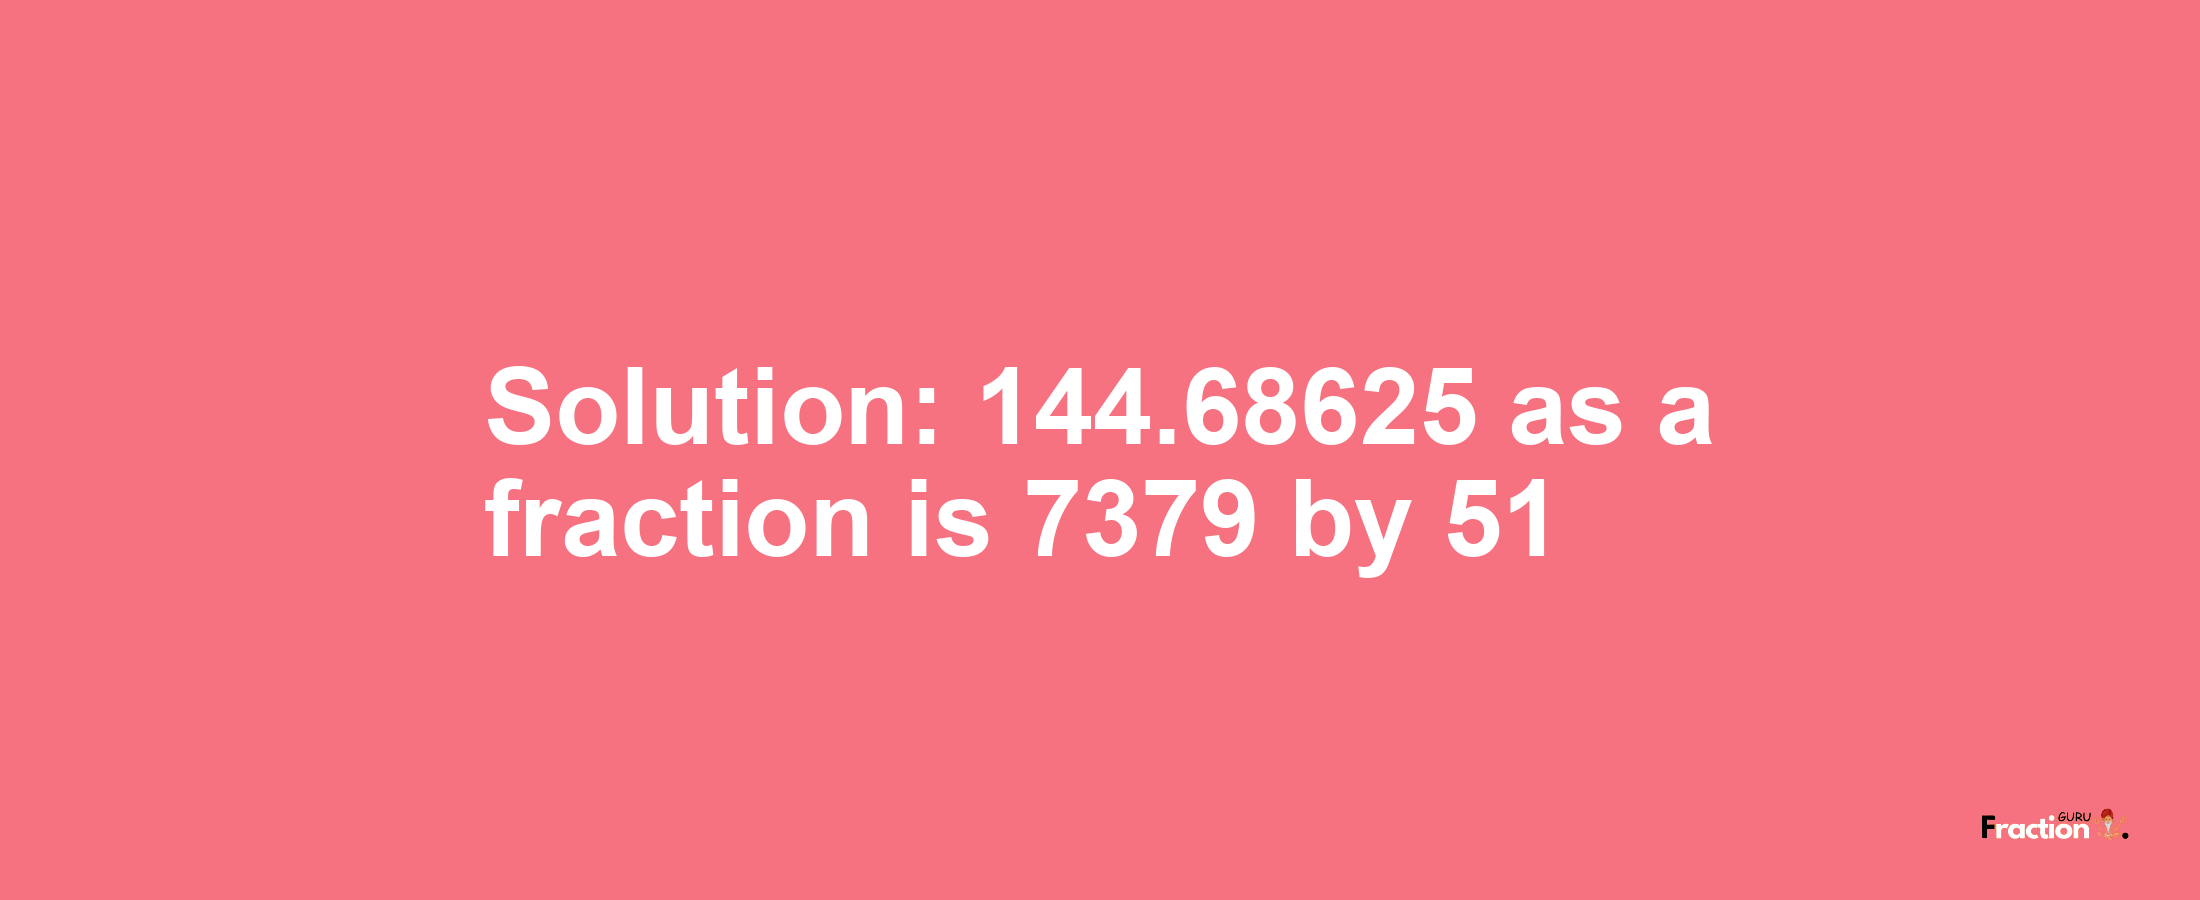 Solution:144.68625 as a fraction is 7379/51